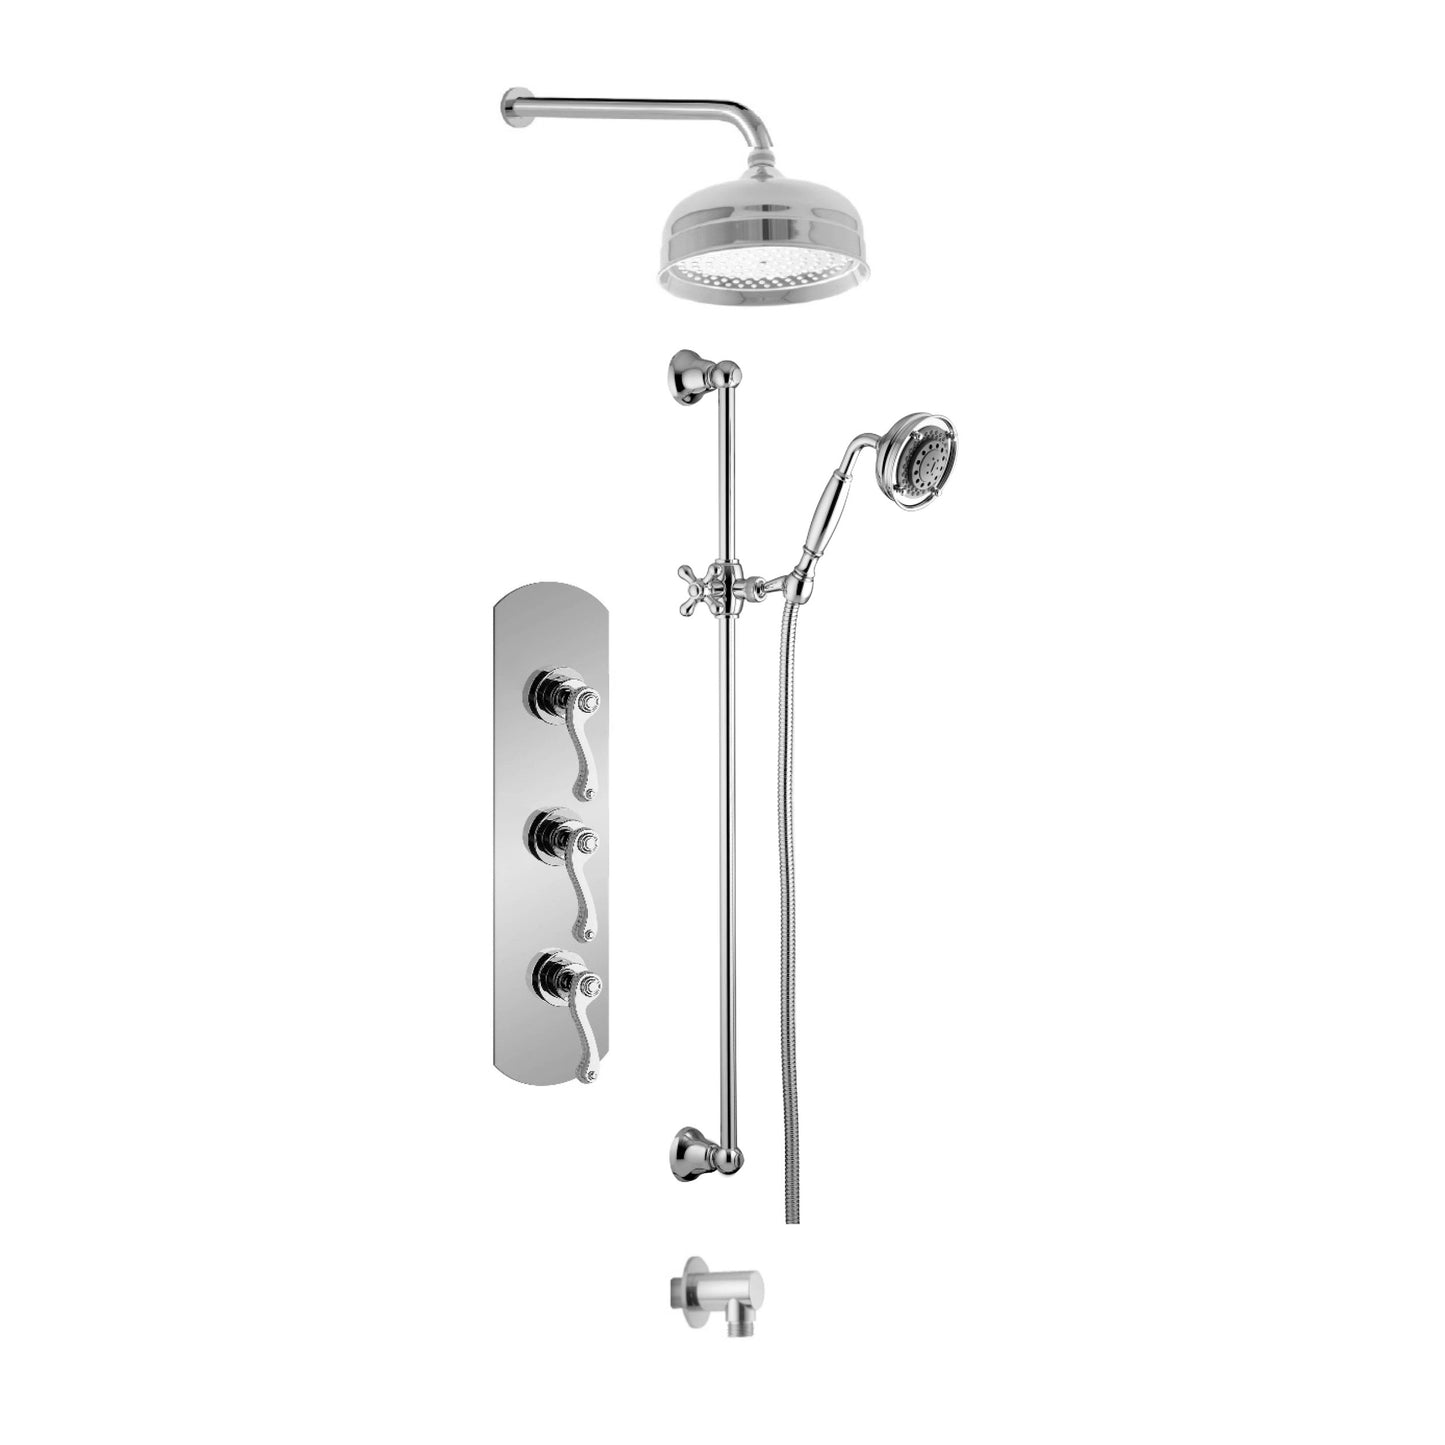 Aquadesign Products Shower Kit (Classic 3711CLAS) - Chrome